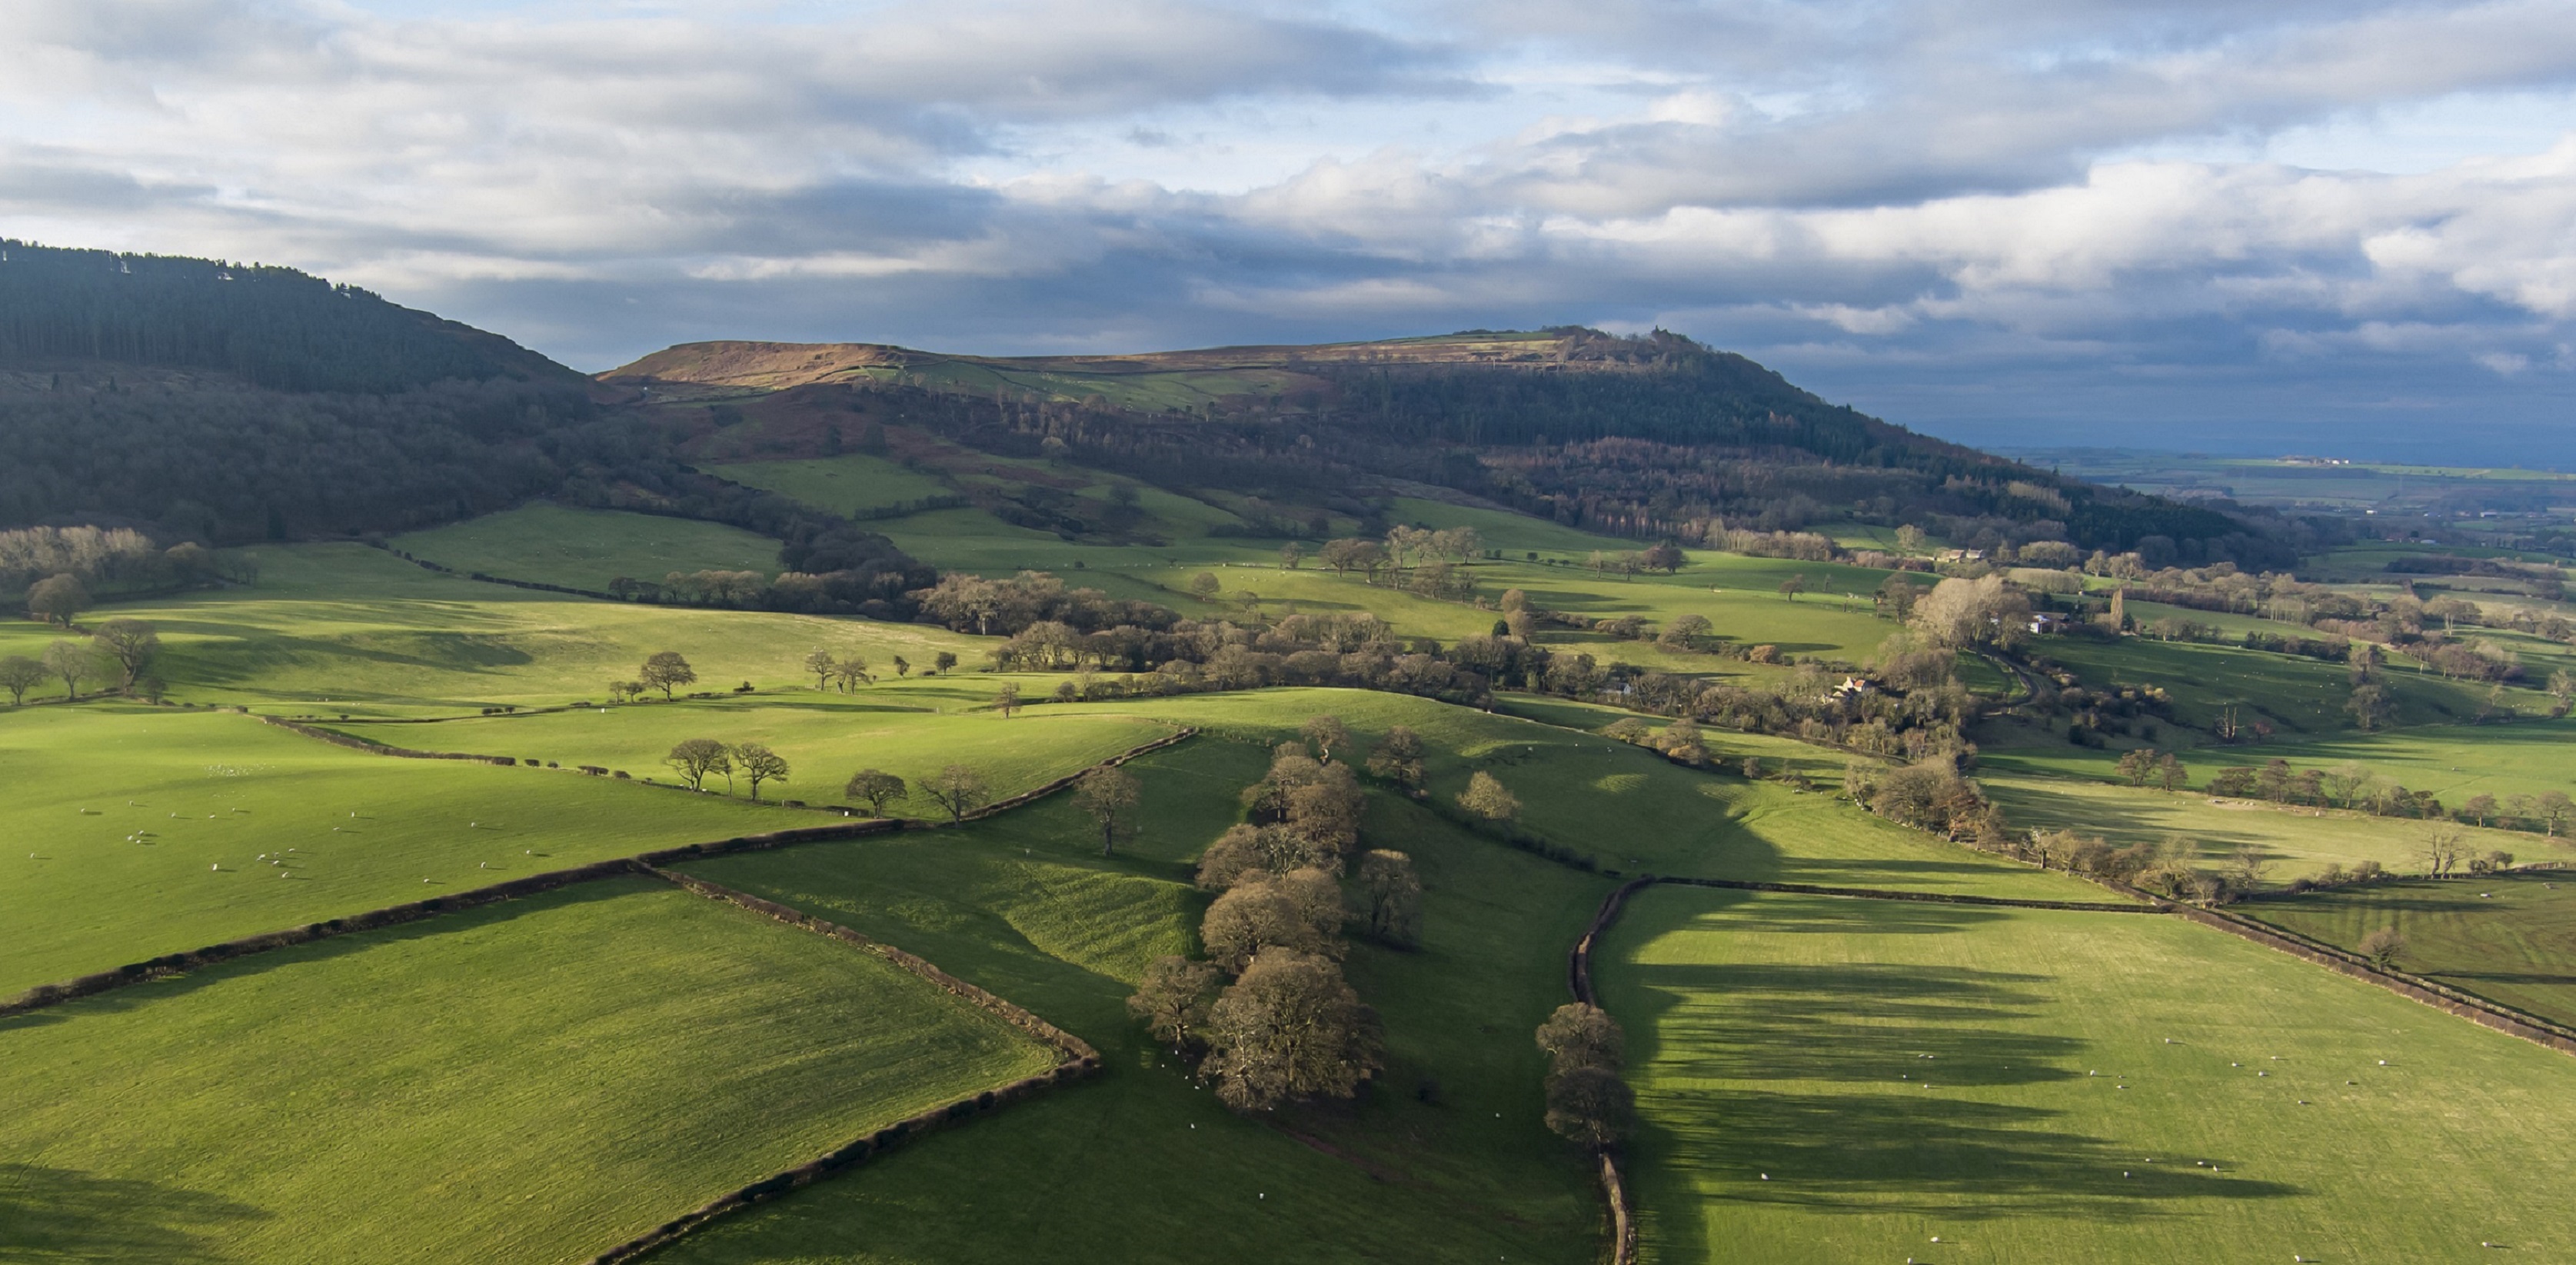 View from Swainby, near Stokesley